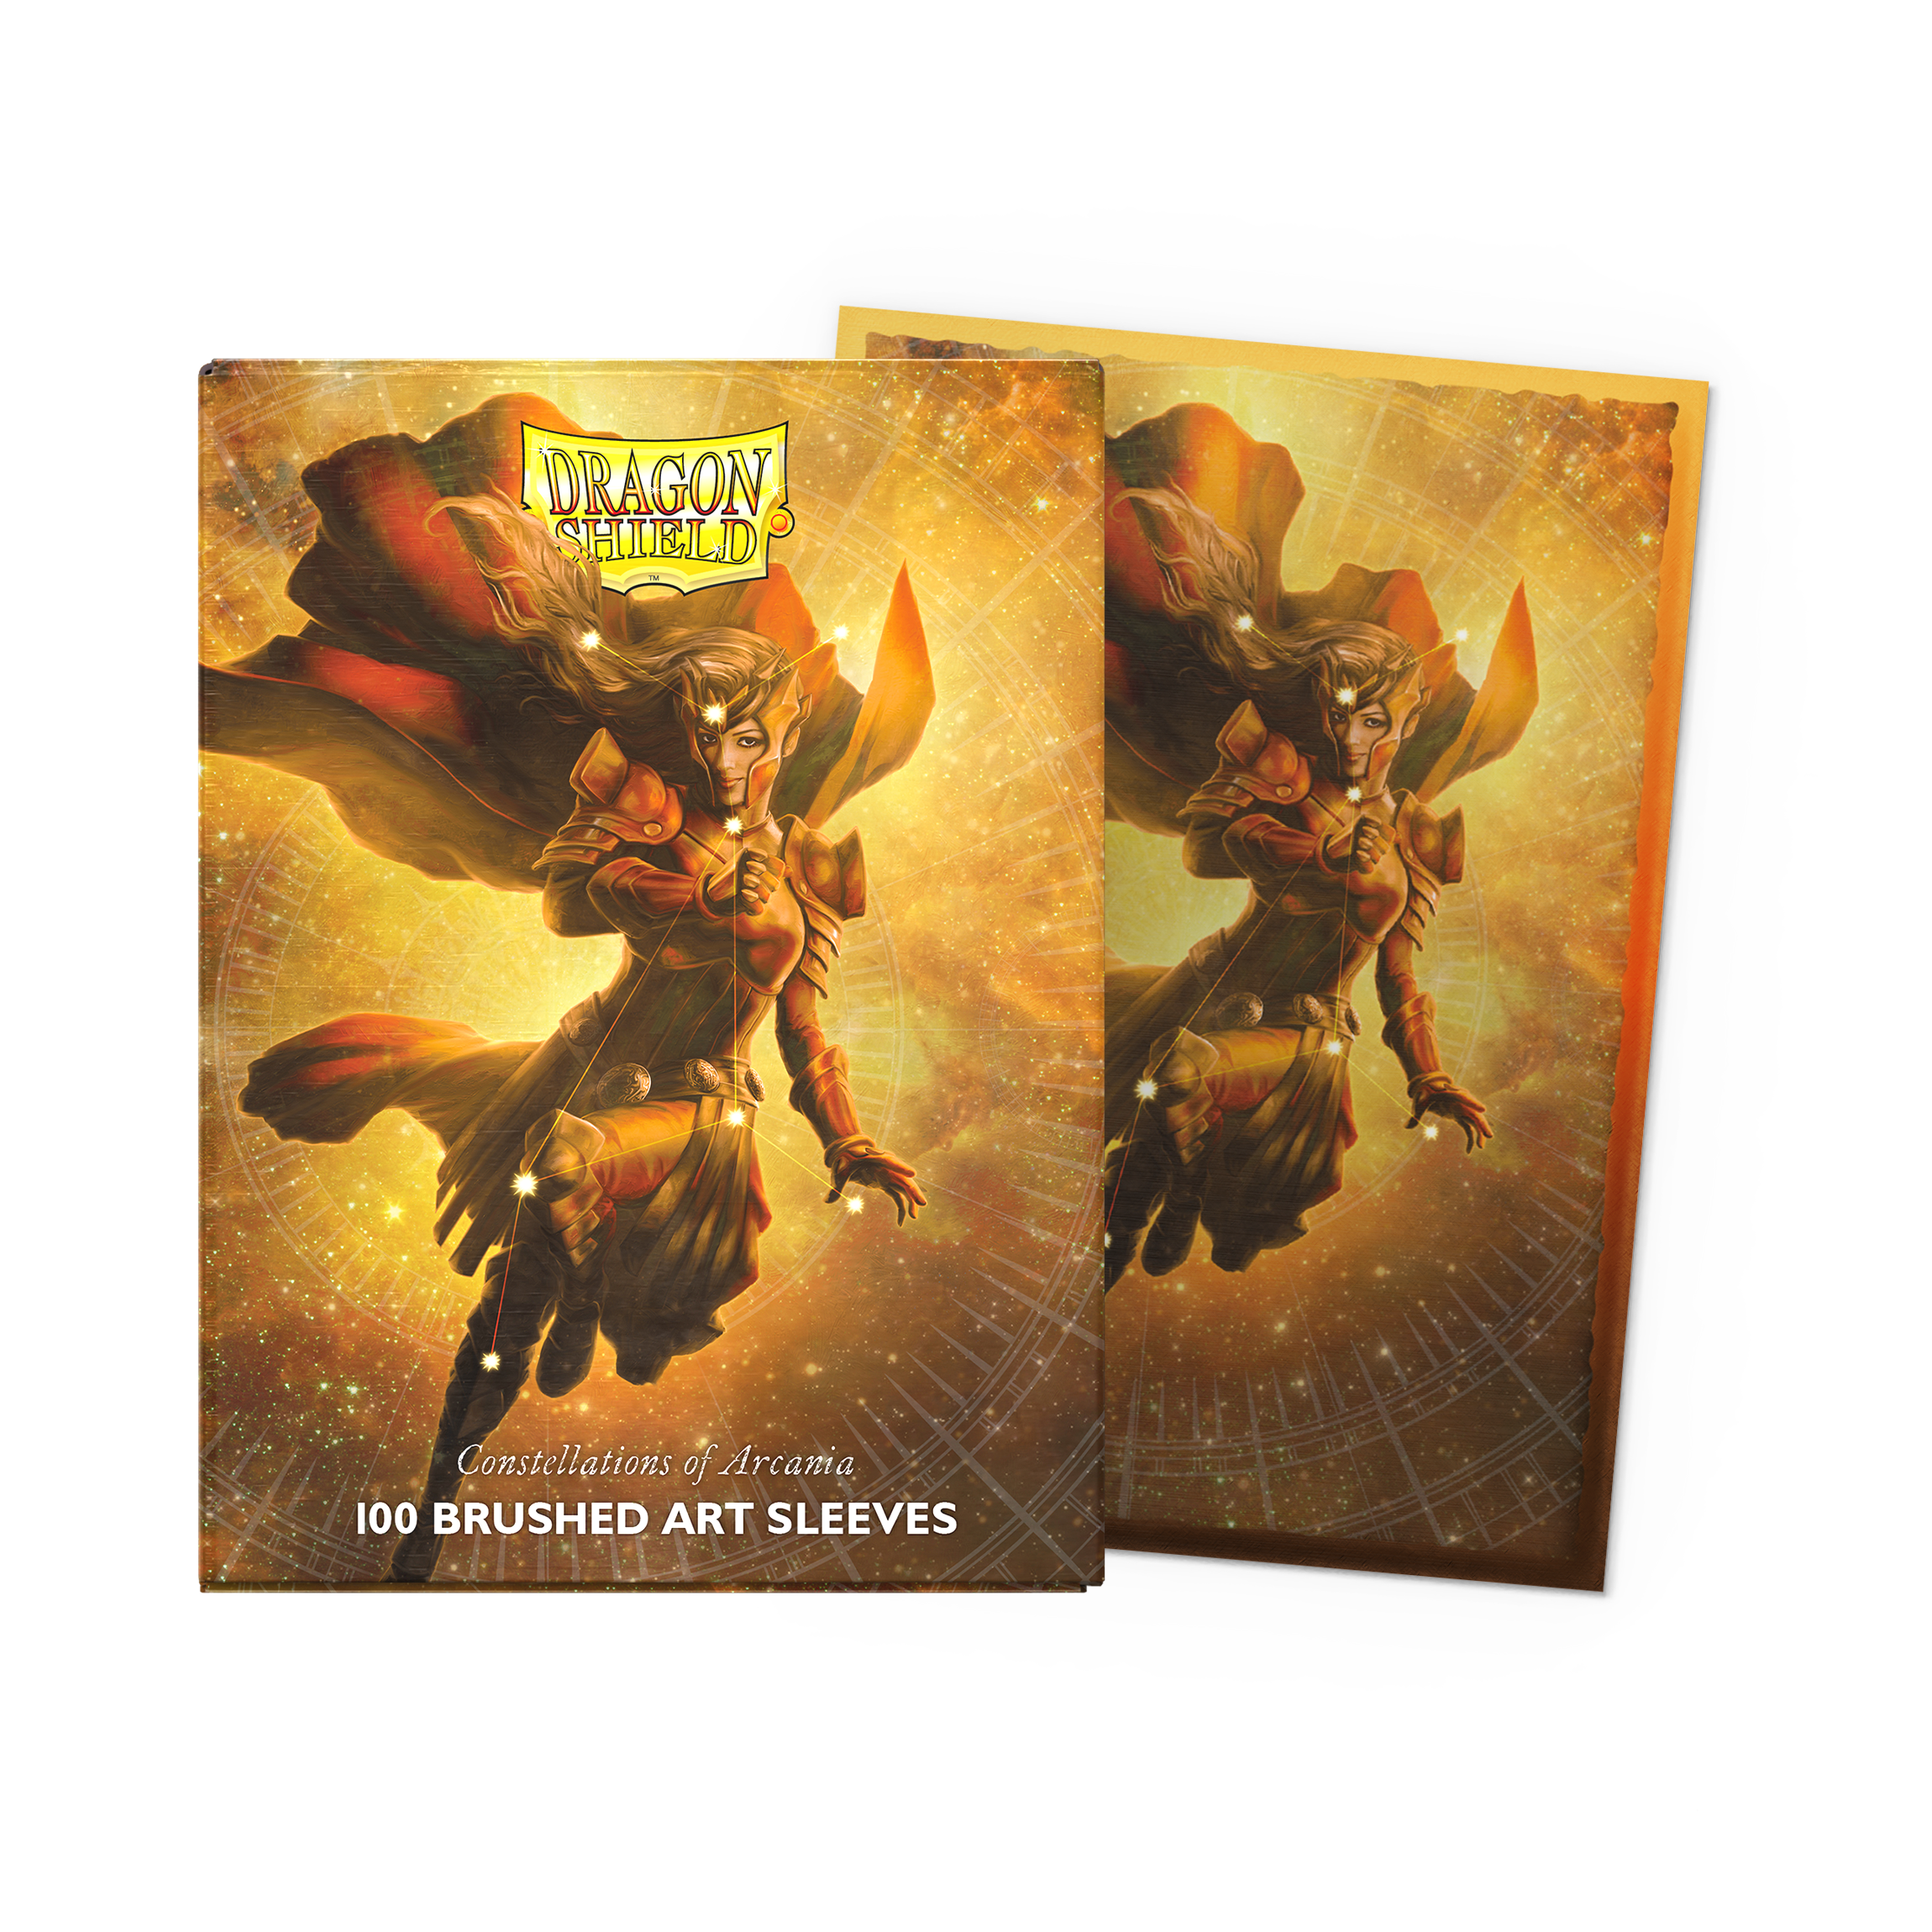  Dragon Shield Card Sleeves – Brushed Art Game of